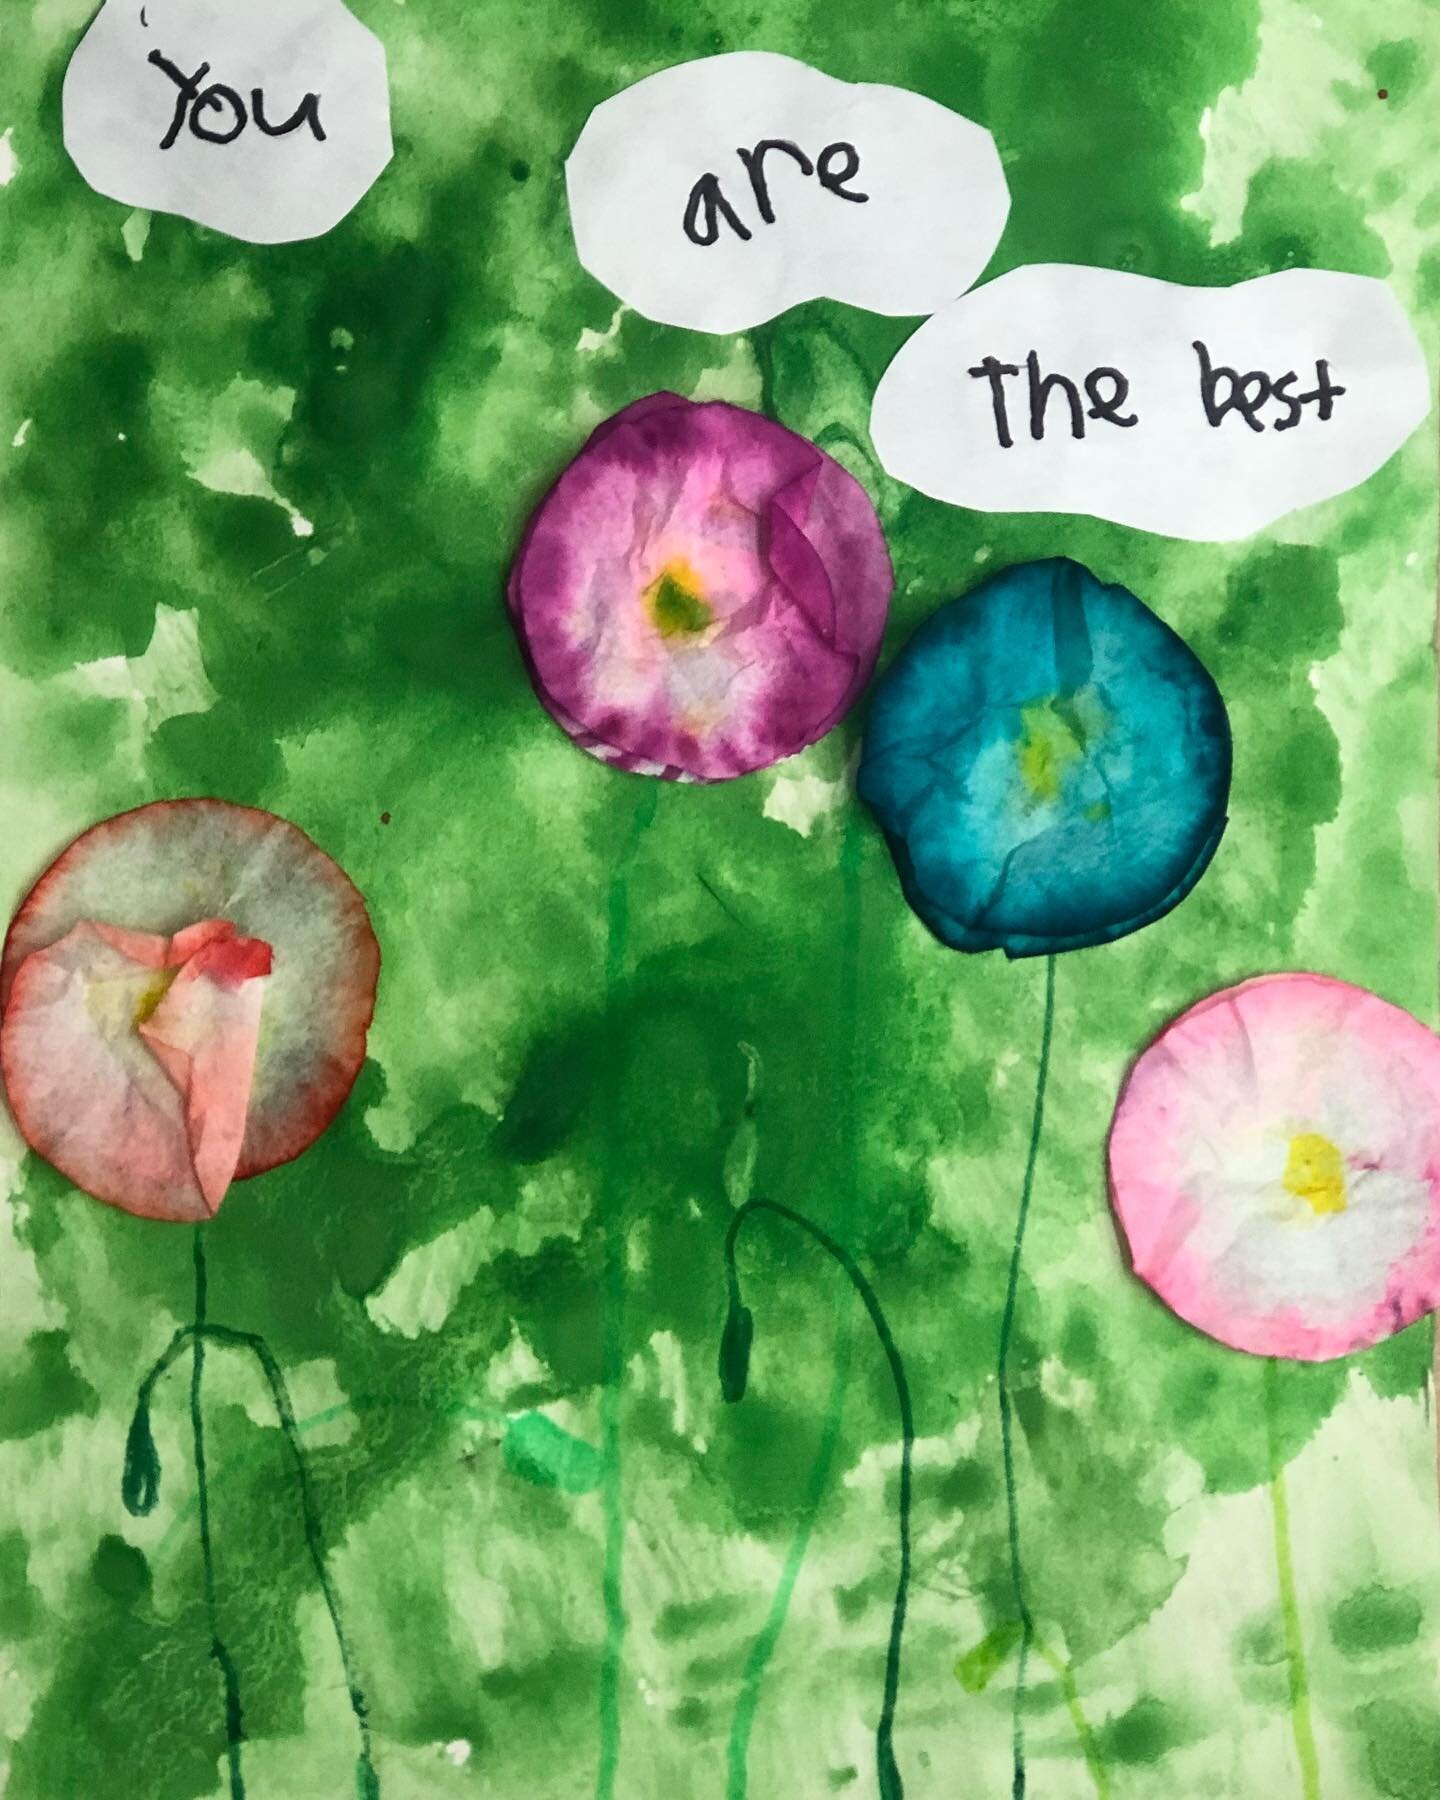 Happy Mother&rsquo;s Day from Marion Carson Out of School Care!🌺🌺
*
*
*
*
*
*
*
#kindergarten #calgarychild #calgarychildcare #outofschoolcare #elementaryart #earlyliteracy #finemotorskills #happymothersday #mothersday